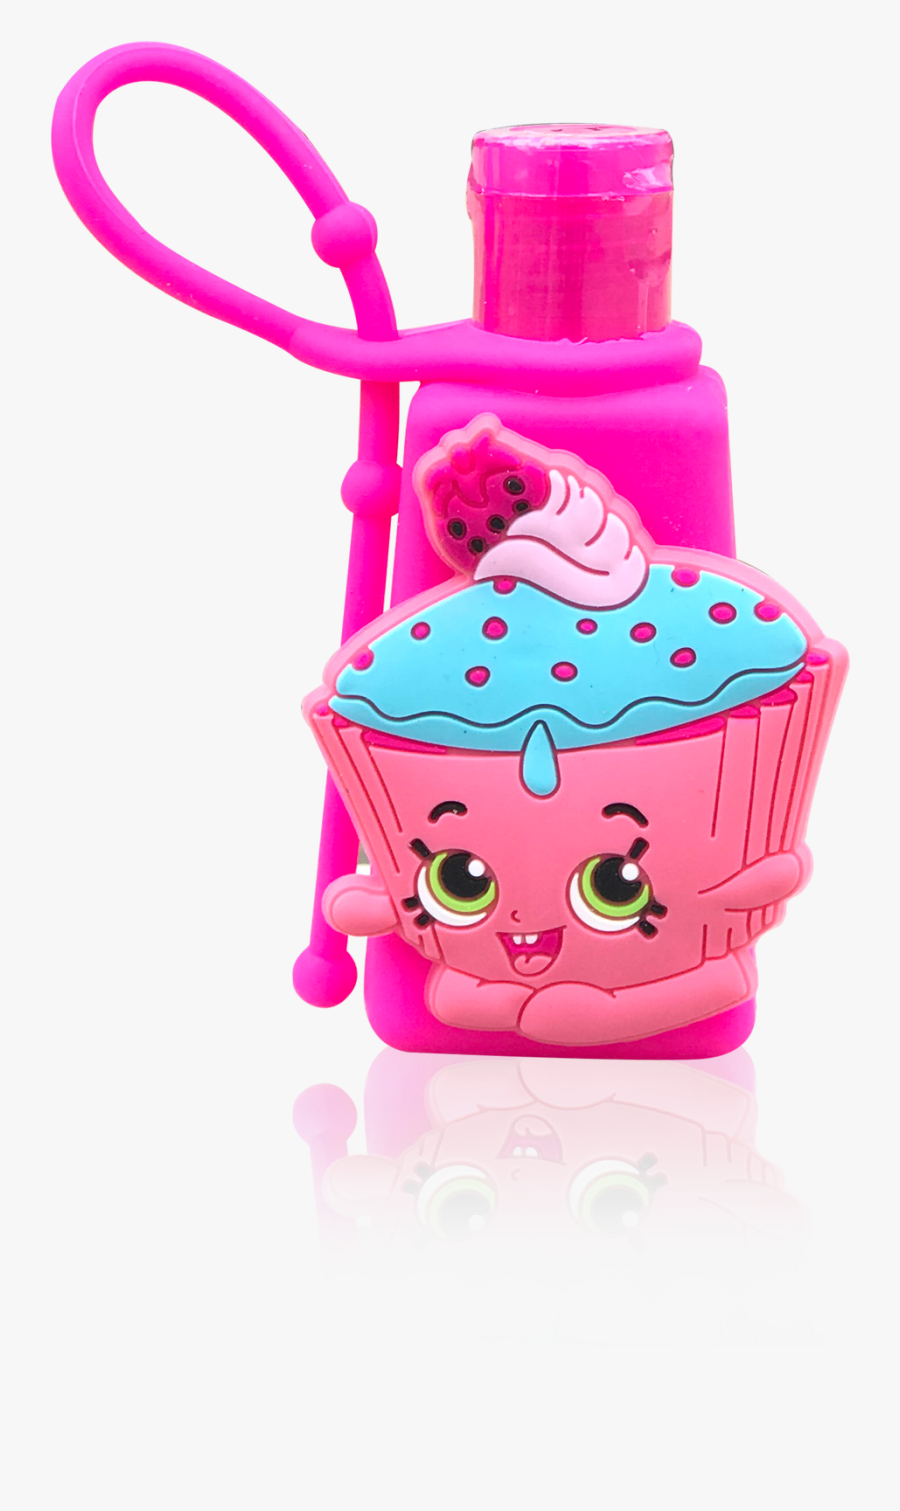 Load Image Into Gallery Viewer, Shopkins Cupcake Chic - Cupcake Chic Shopkins, Transparent Clipart